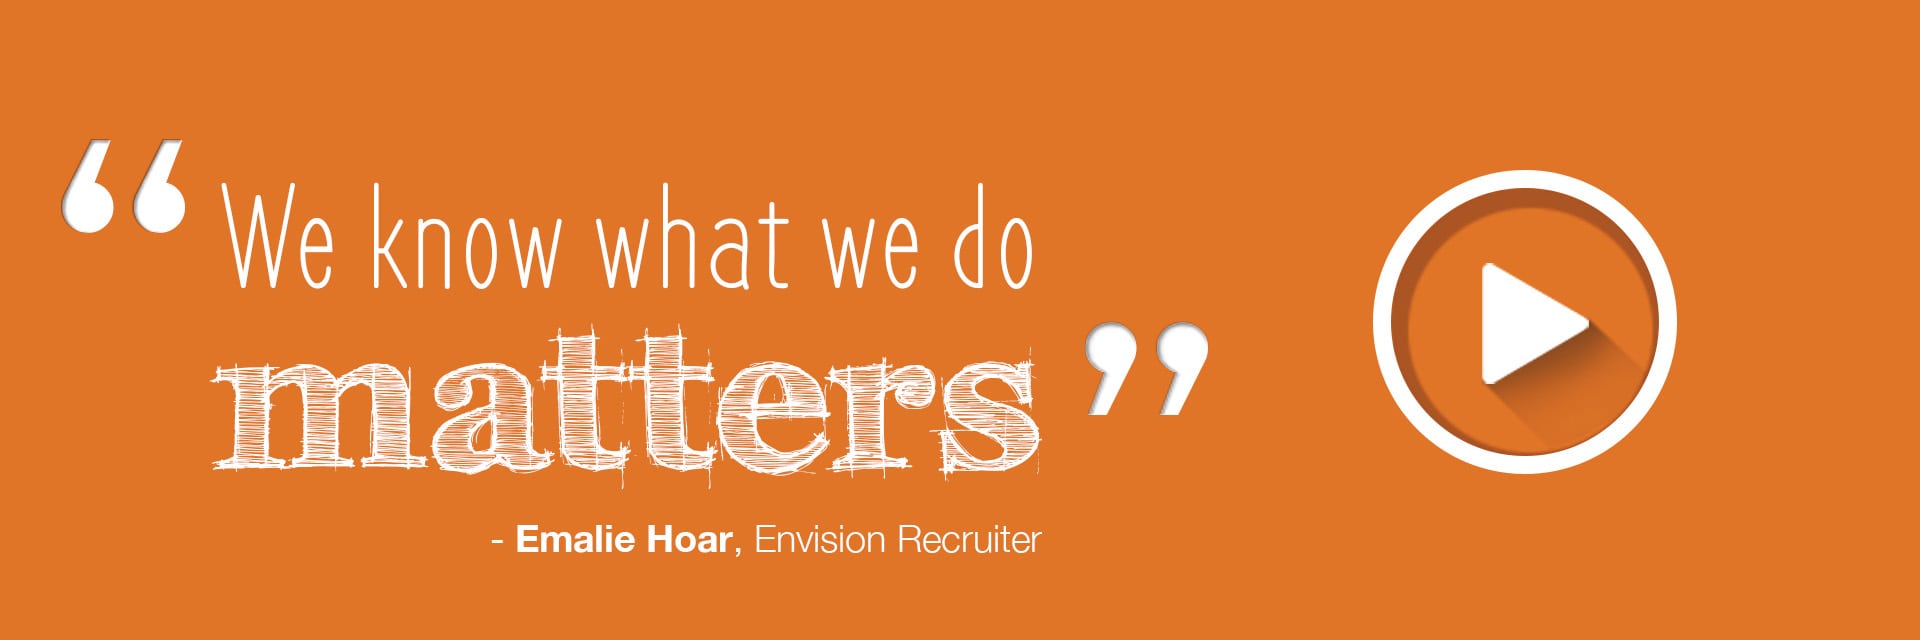 What we do matters - Envision Employment video